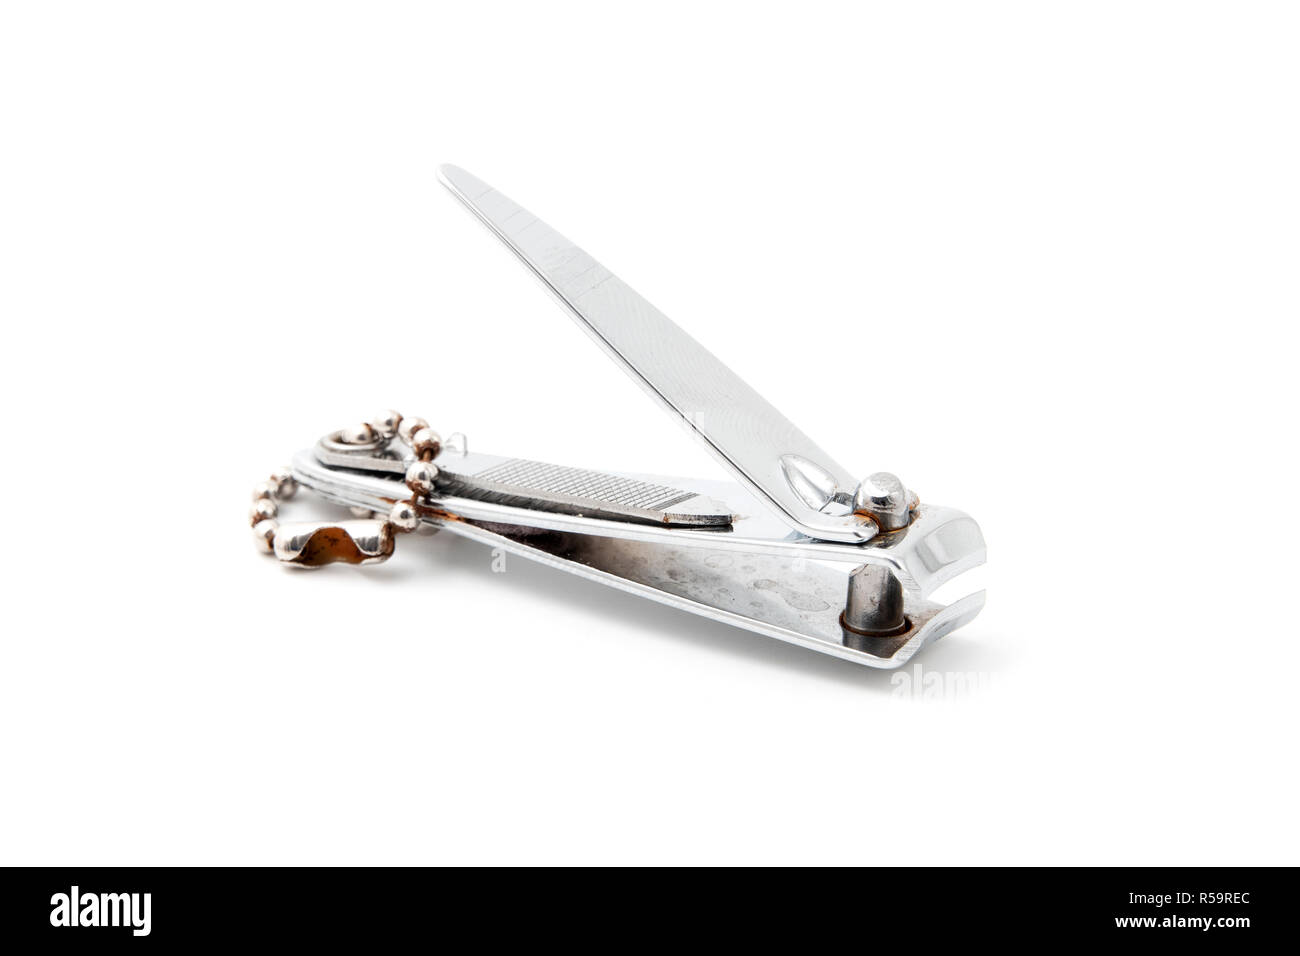 Nail Clipper on a white background Stock Photo